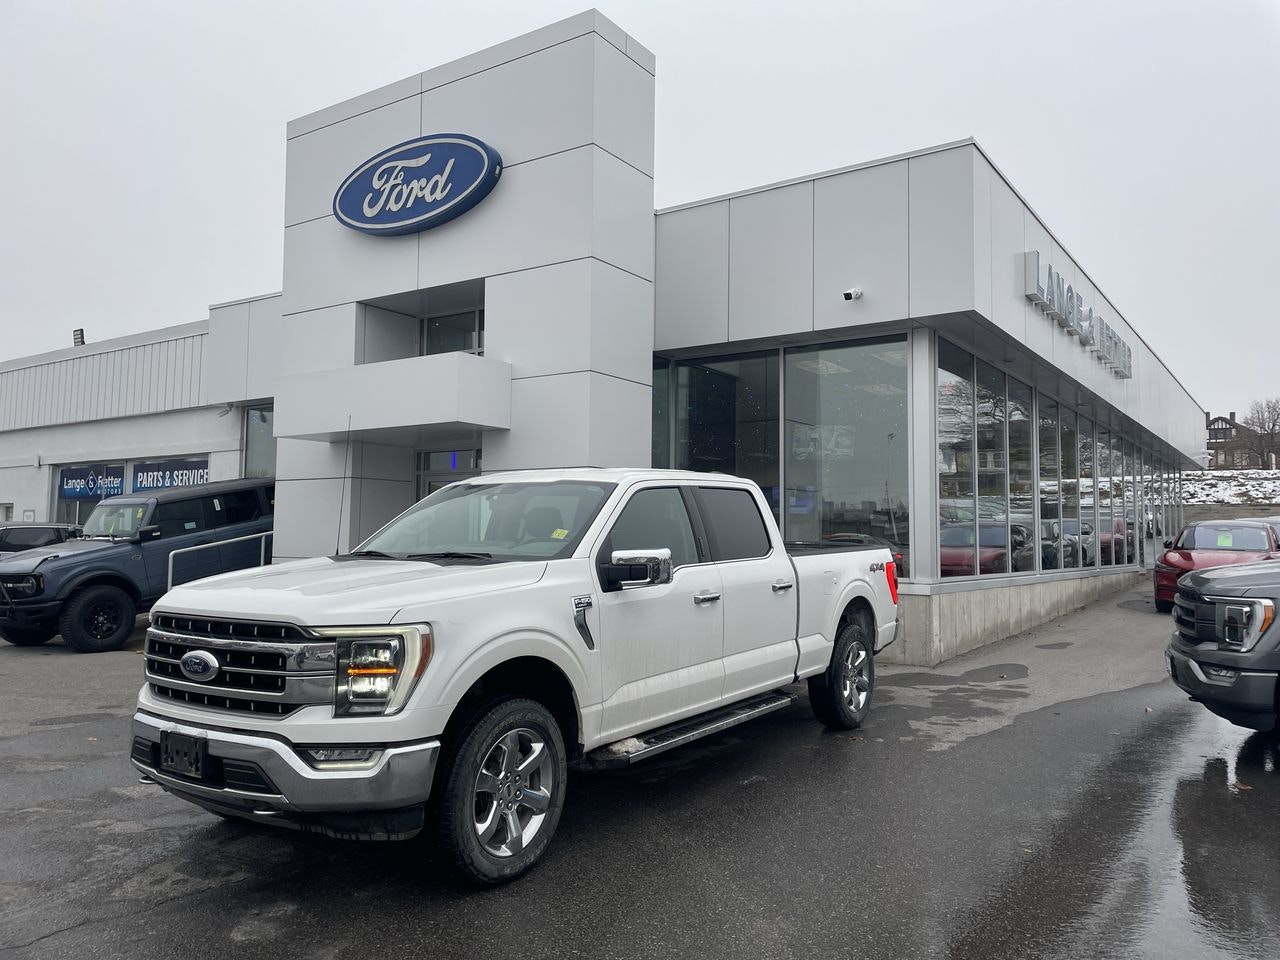 2021 Ford F-150 - 21506A Full Image 1